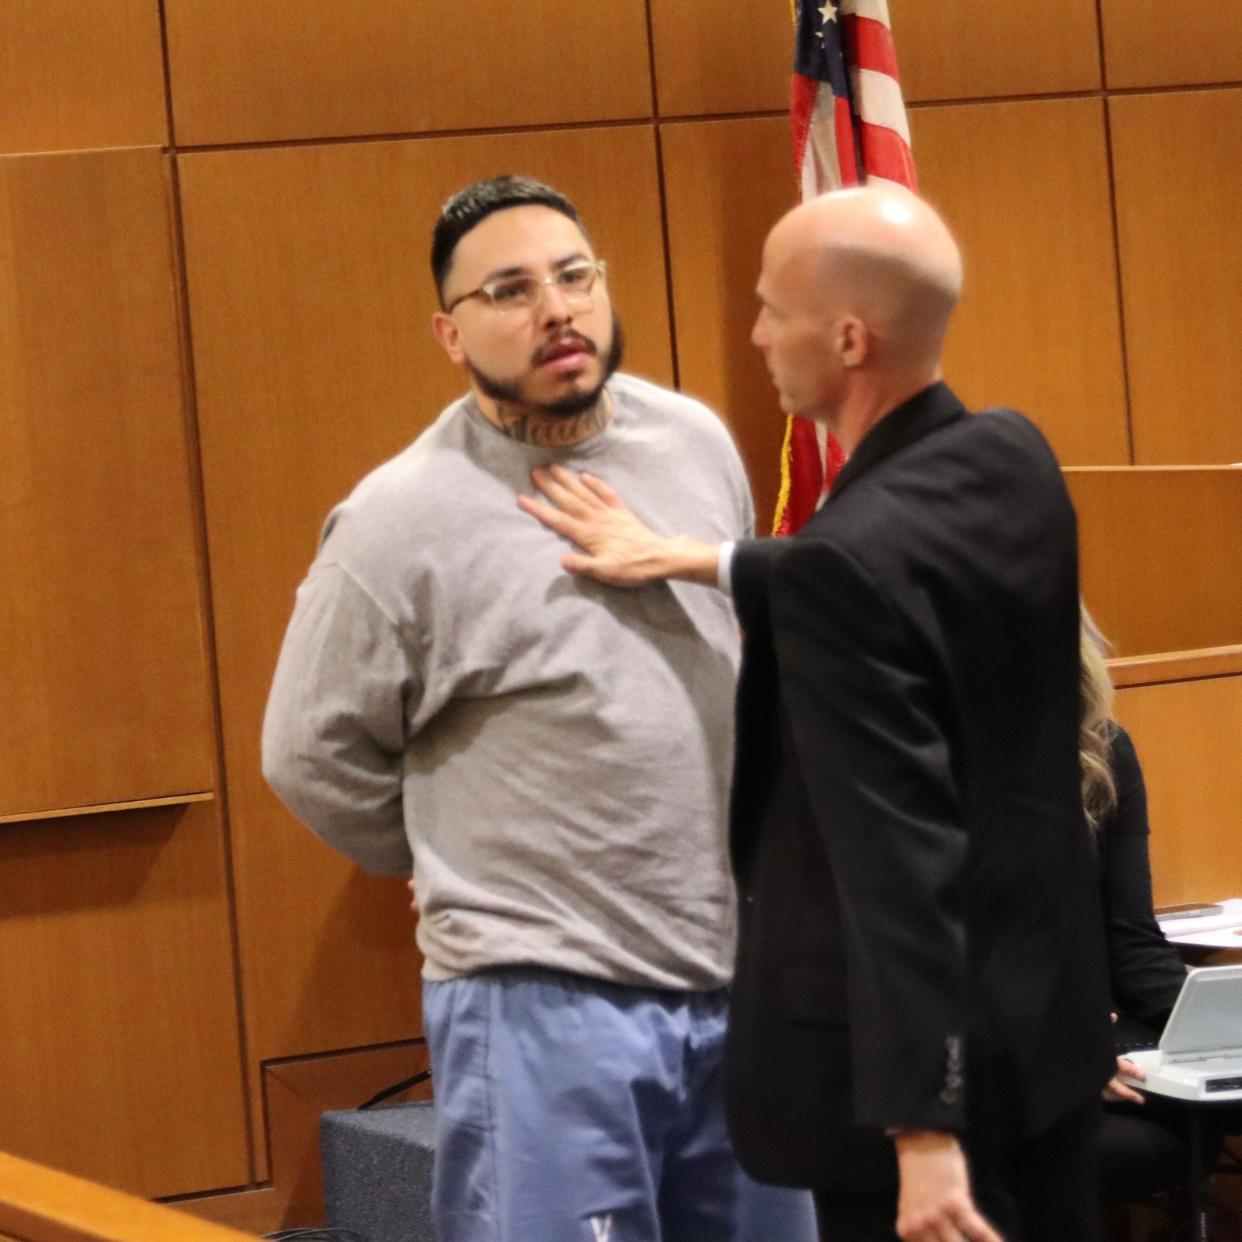 Euren Balbuena reacts after a relative of the victim lunged at him during sentencing Wednesday for the 2020 murder of his girlfriend.